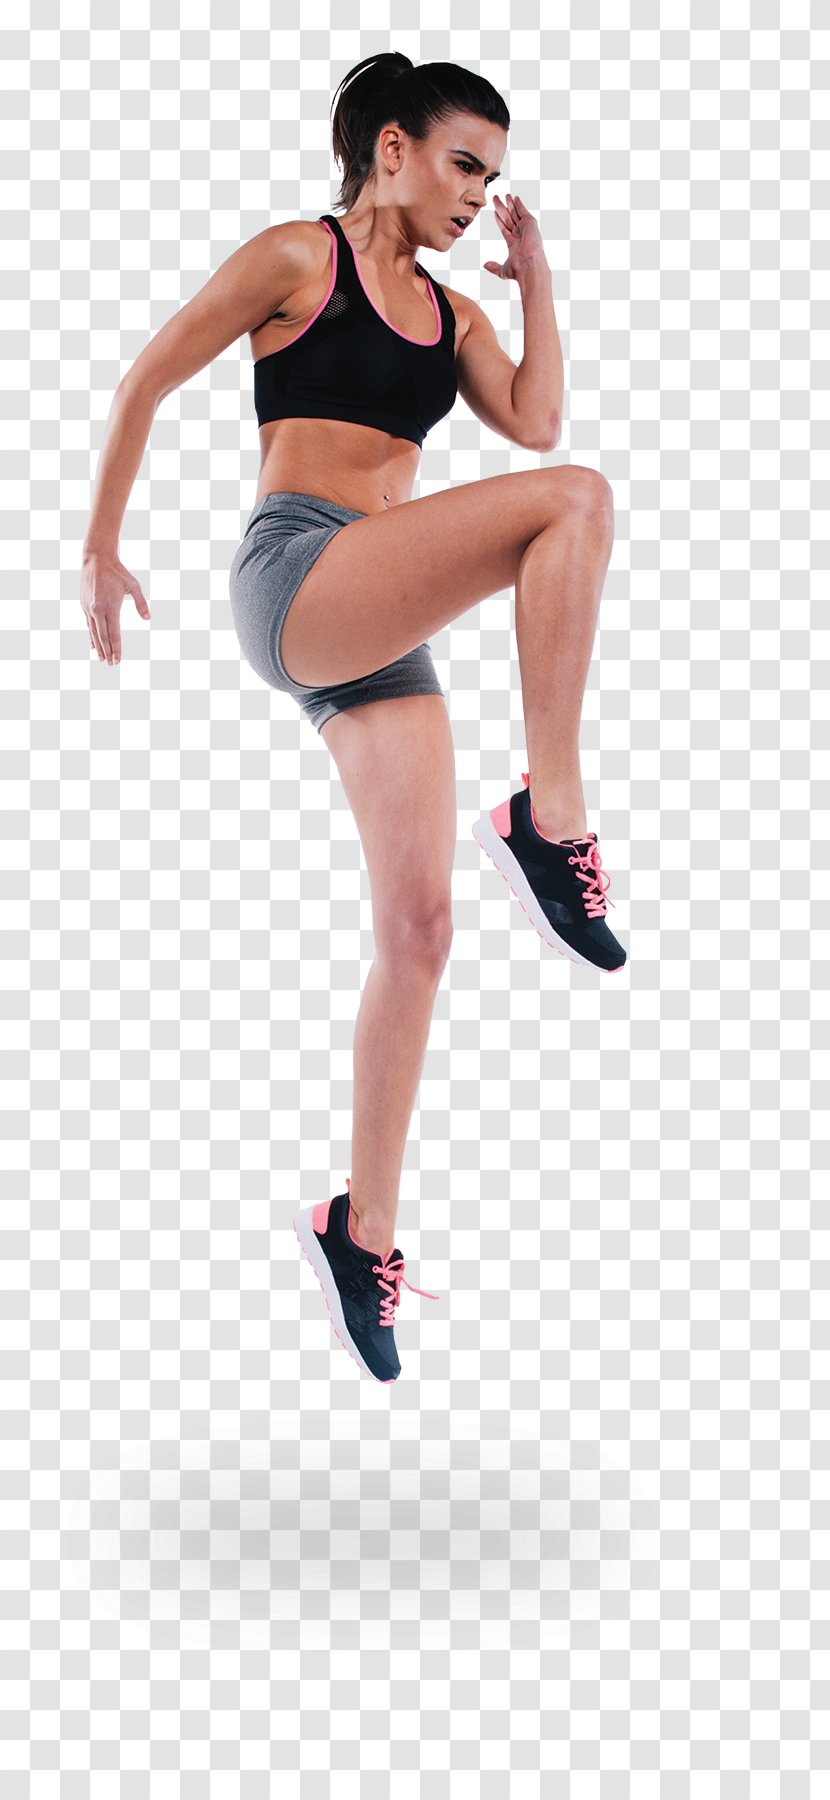 Exercise Fitness Centre Sports Physical Stretching - Heart - Discus Track And Field Transparent PNG